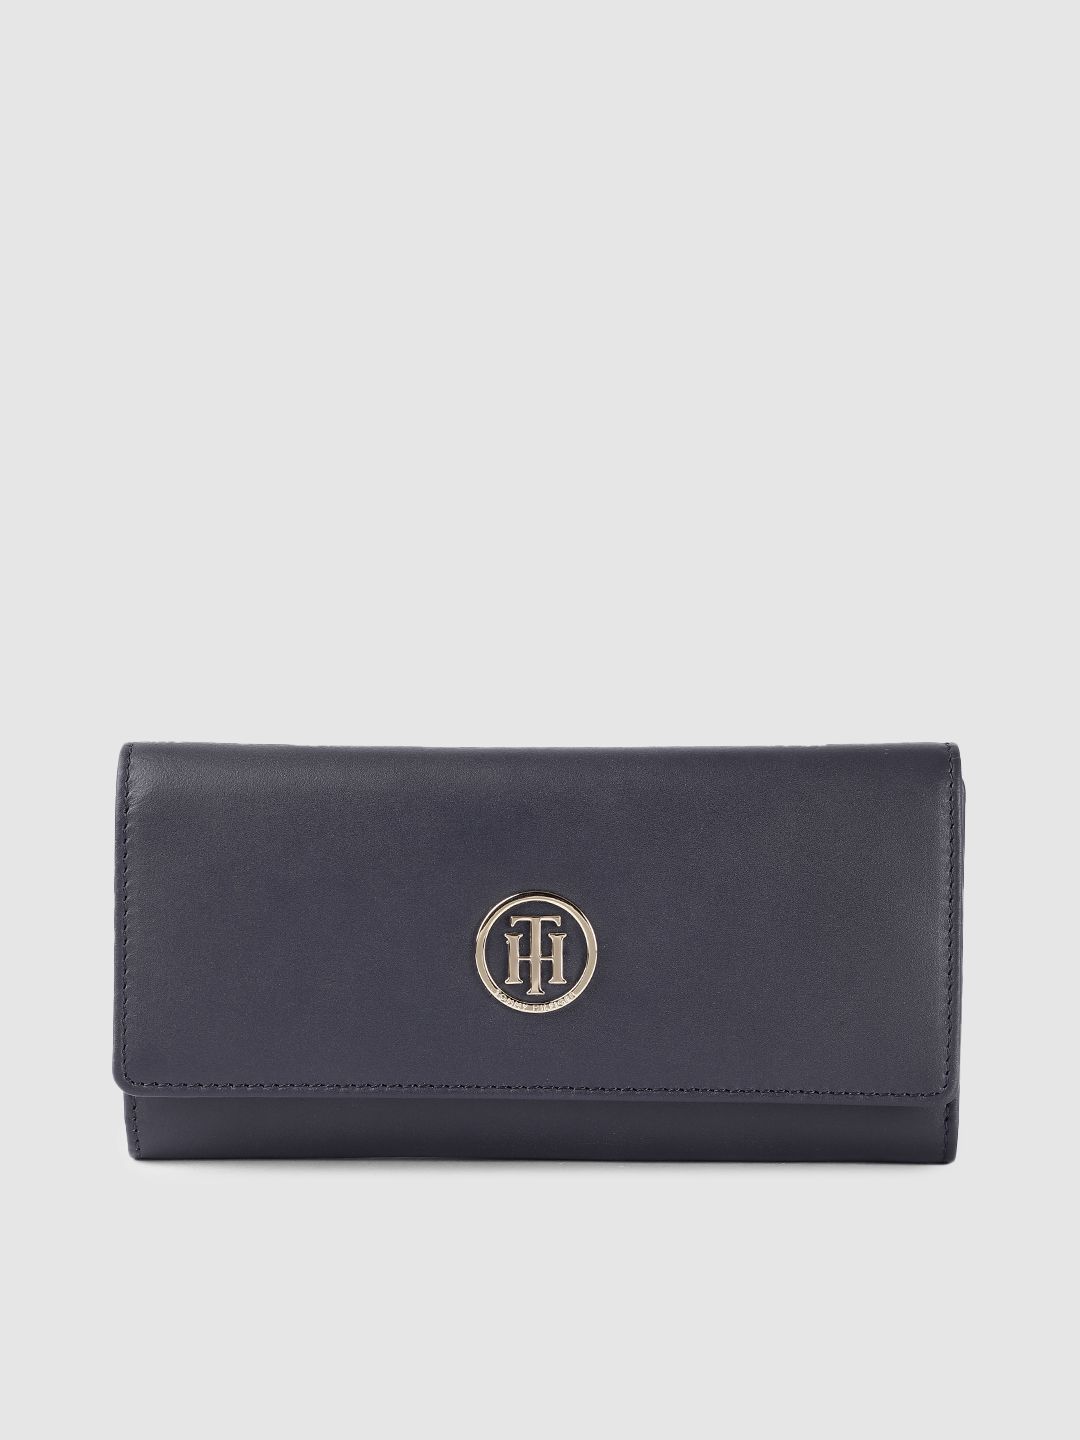 Tommy Hilfiger Women Navy Blue Leather Envelope Price in India